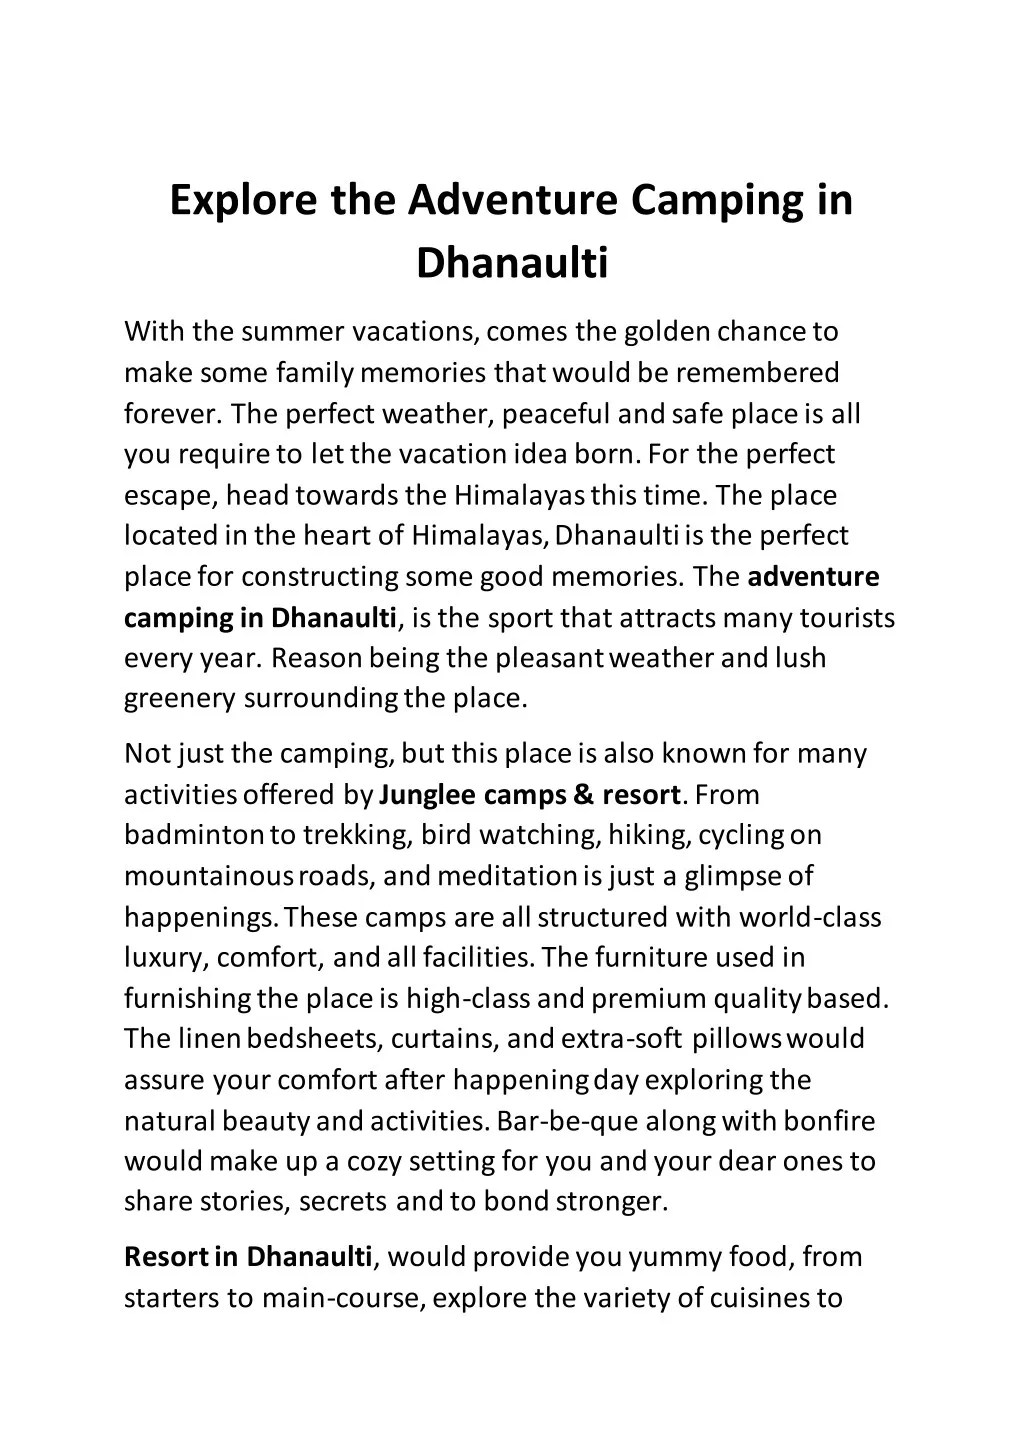 explore the adventure camping in dhanaulti